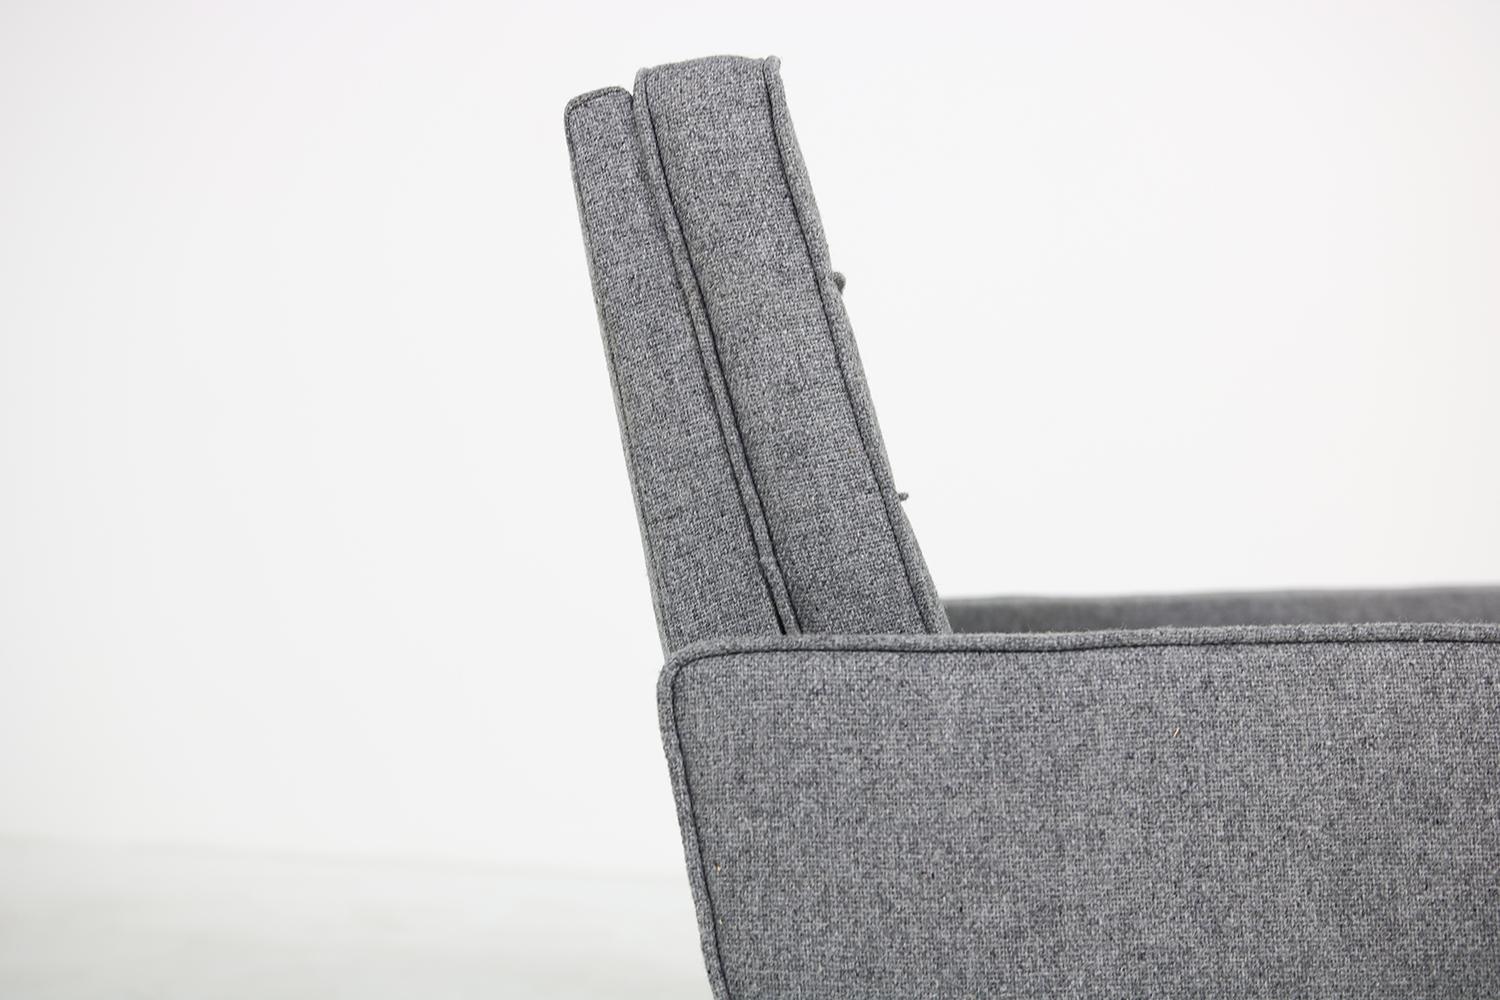 florence knoll chair